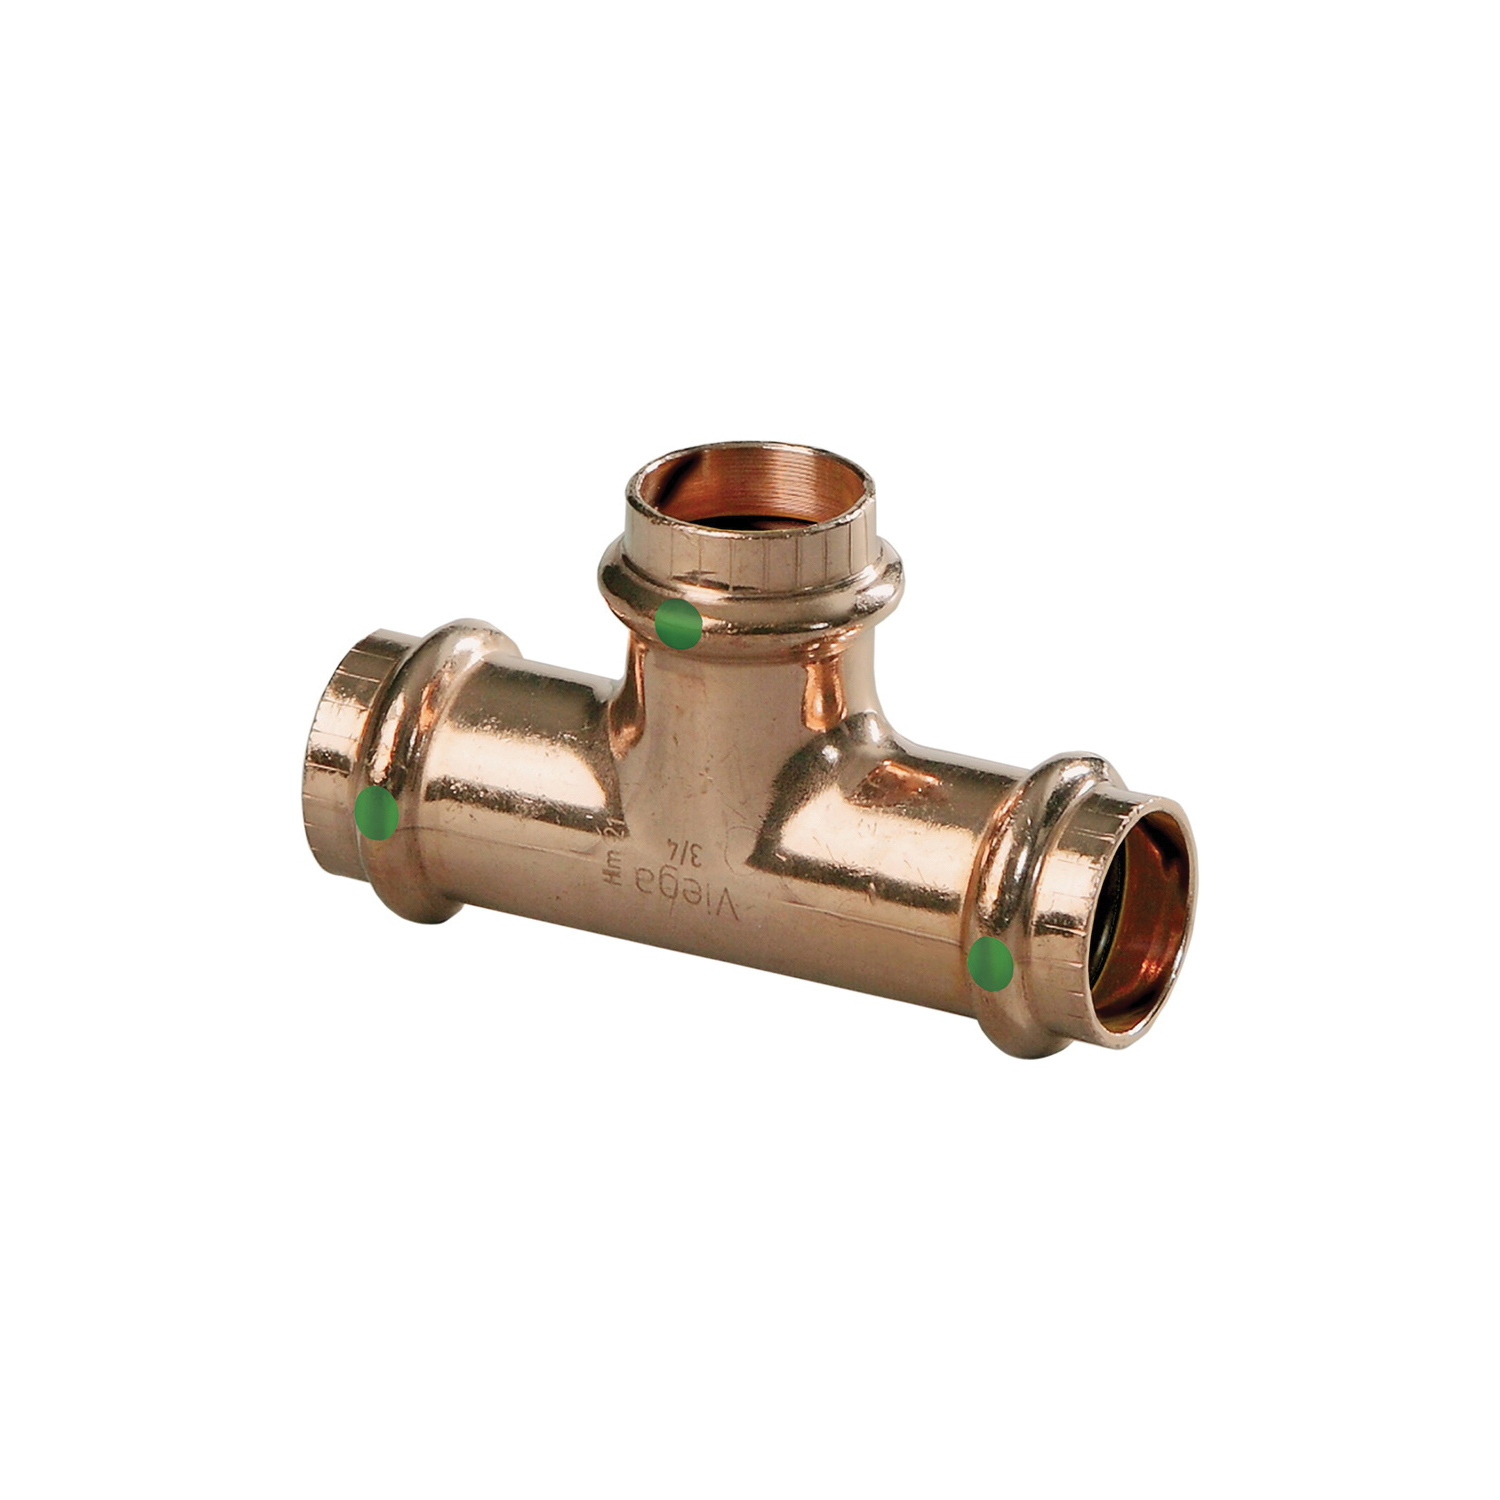 ProPress® 77462 Pipe Tee, 1-1/2 x 1-1/2 x 3/4 in Nominal, Press End Style, Copper, Import